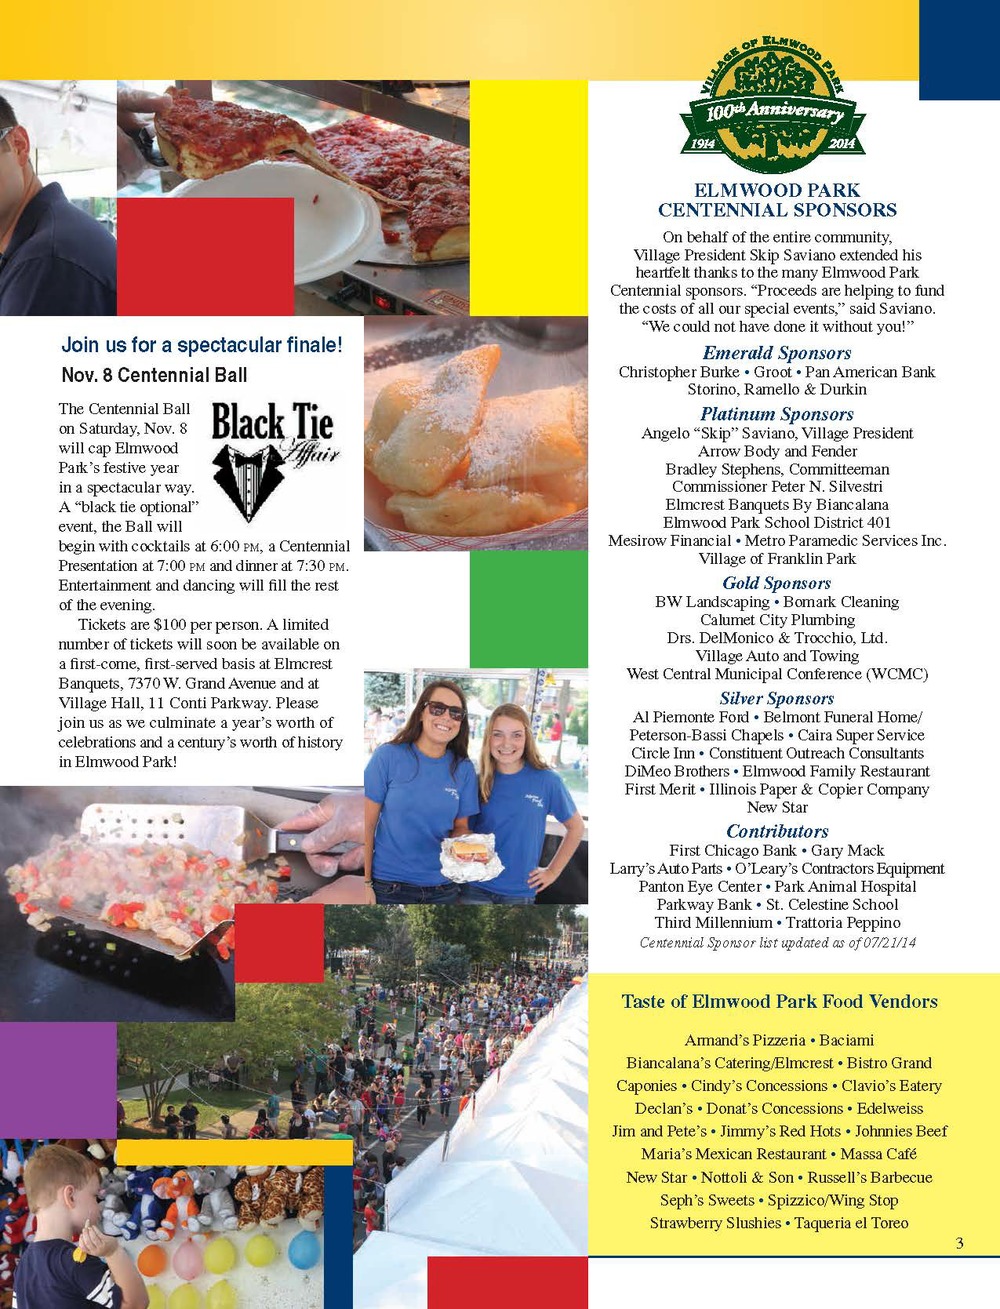 August 2014 EP Newsletter_Page_3.jpg